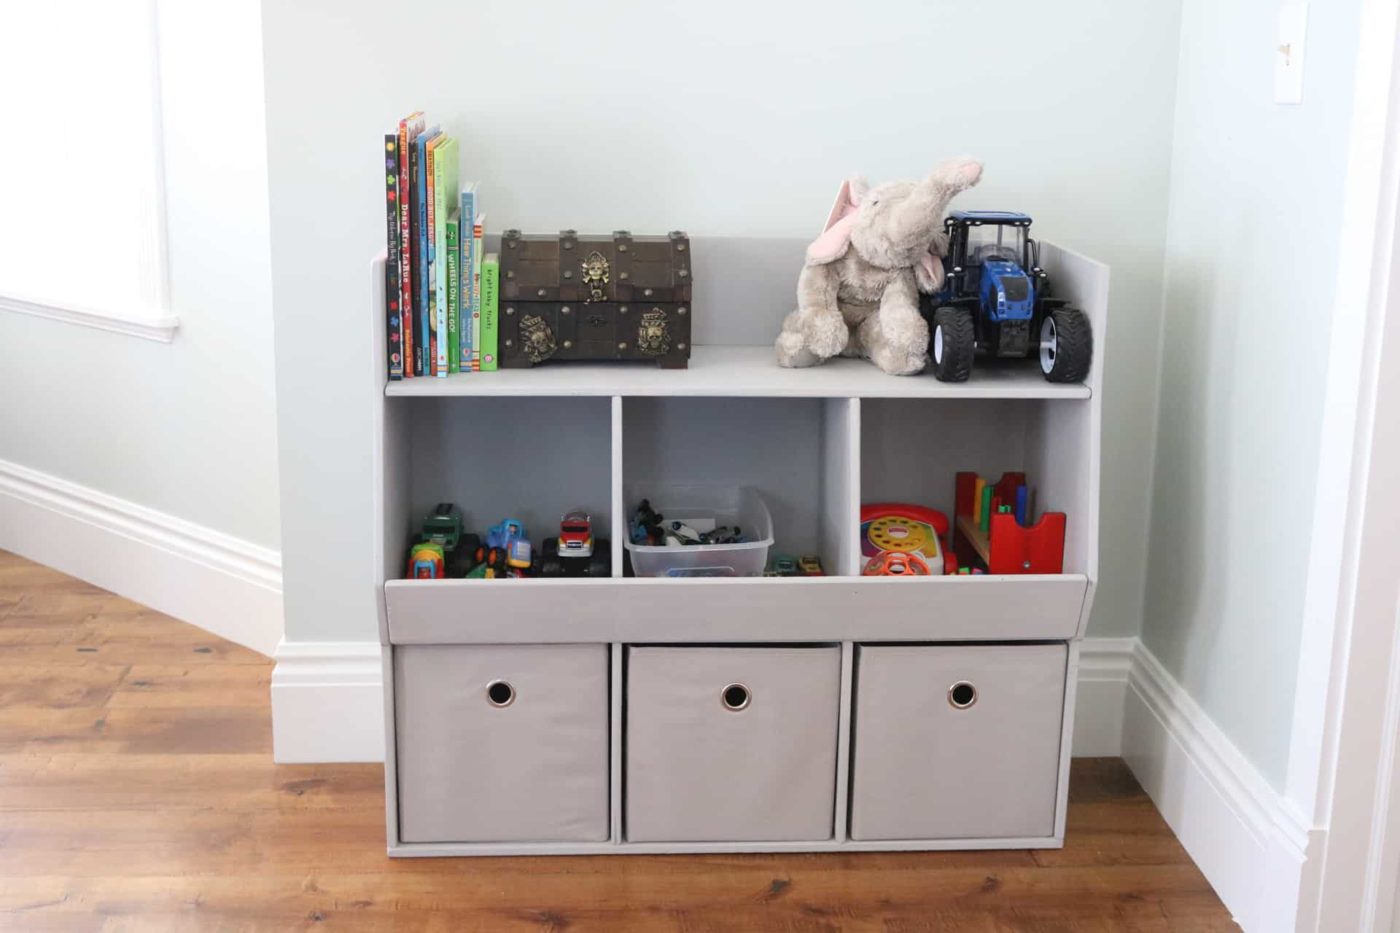 Save time by keeping a cubby organizer